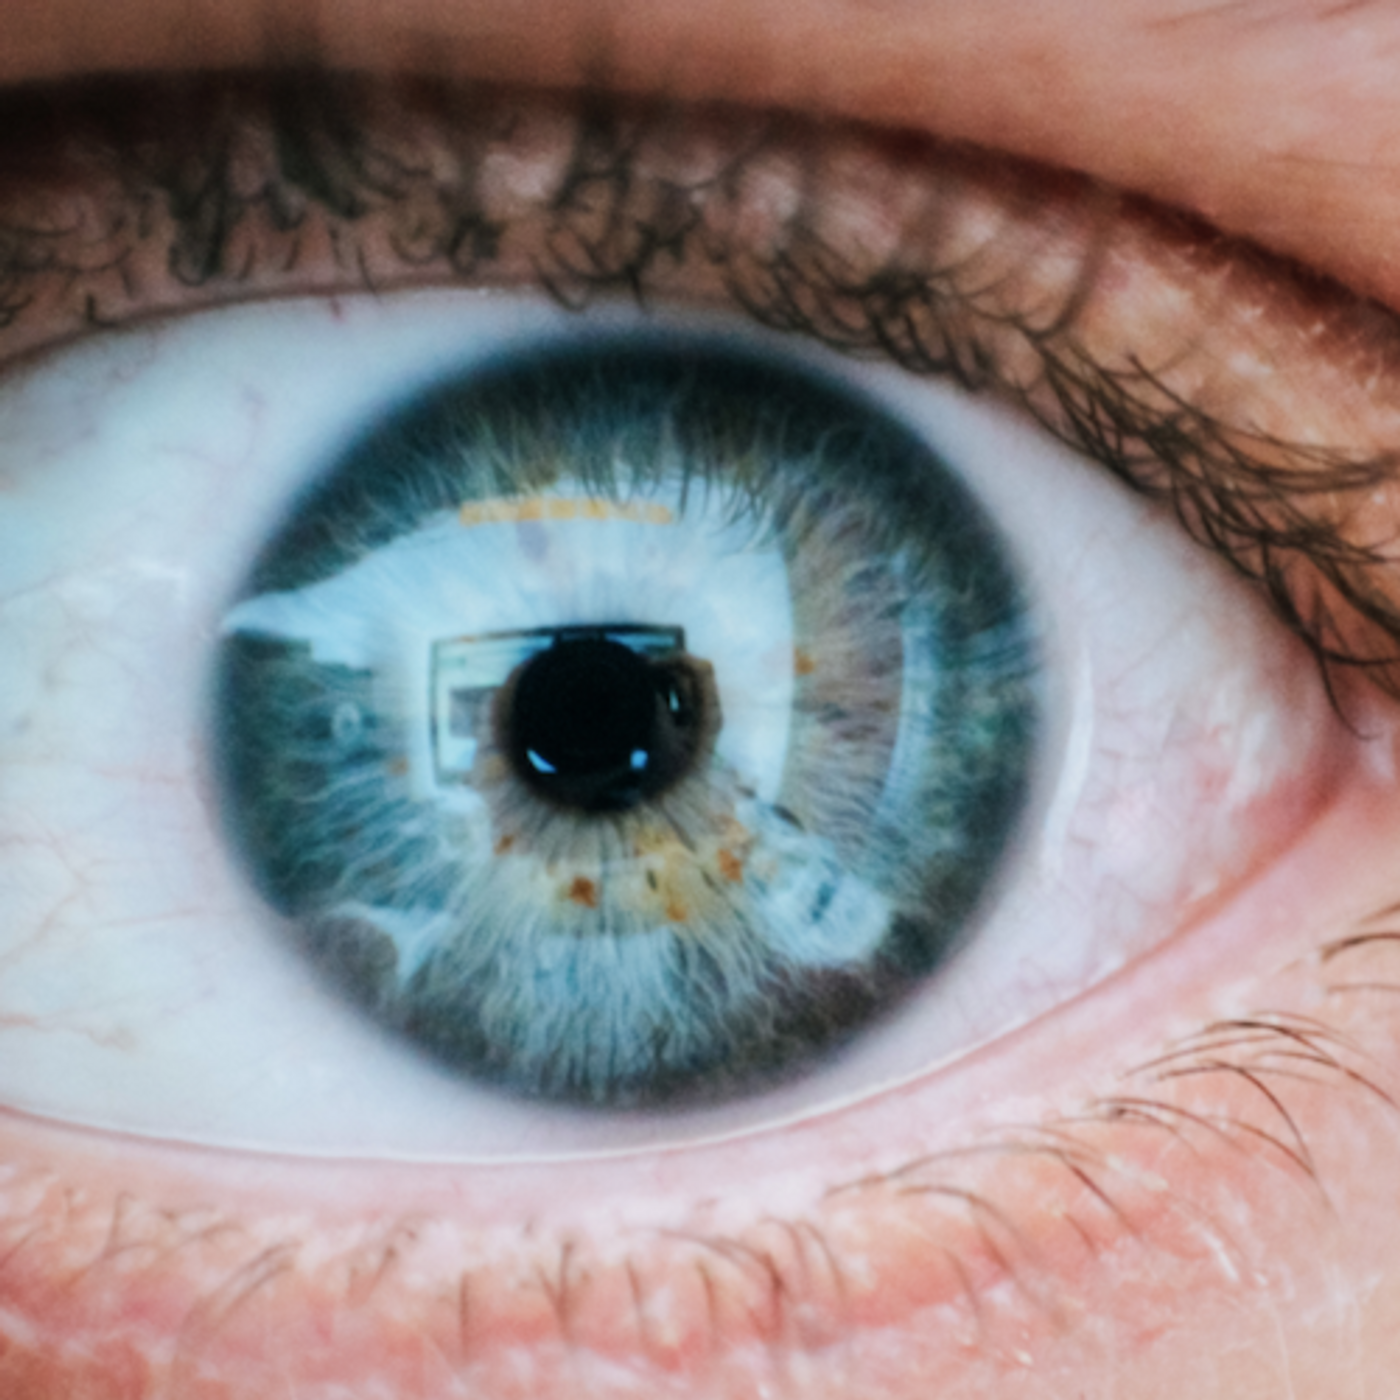 New work may lead to treatments for diseases as varied as dry eye and type 2 diabetes. / Image credit: Pexels